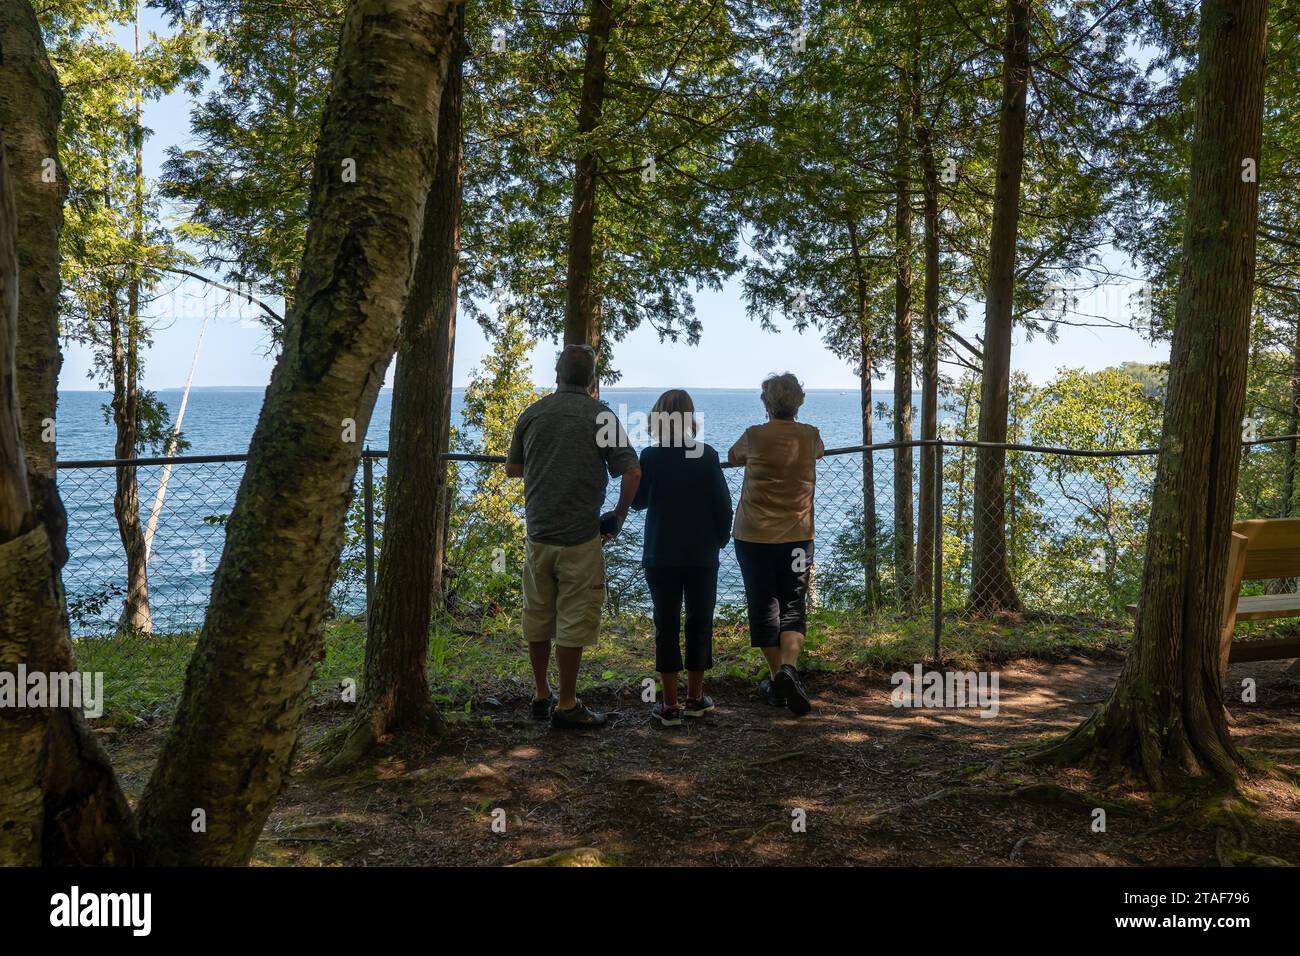 DOOR CO, WI - 15 AUG 2023: Three seniors citizens viewing a lake scene overlook in wooded area of a Wisconsin State Park. Stock Photo